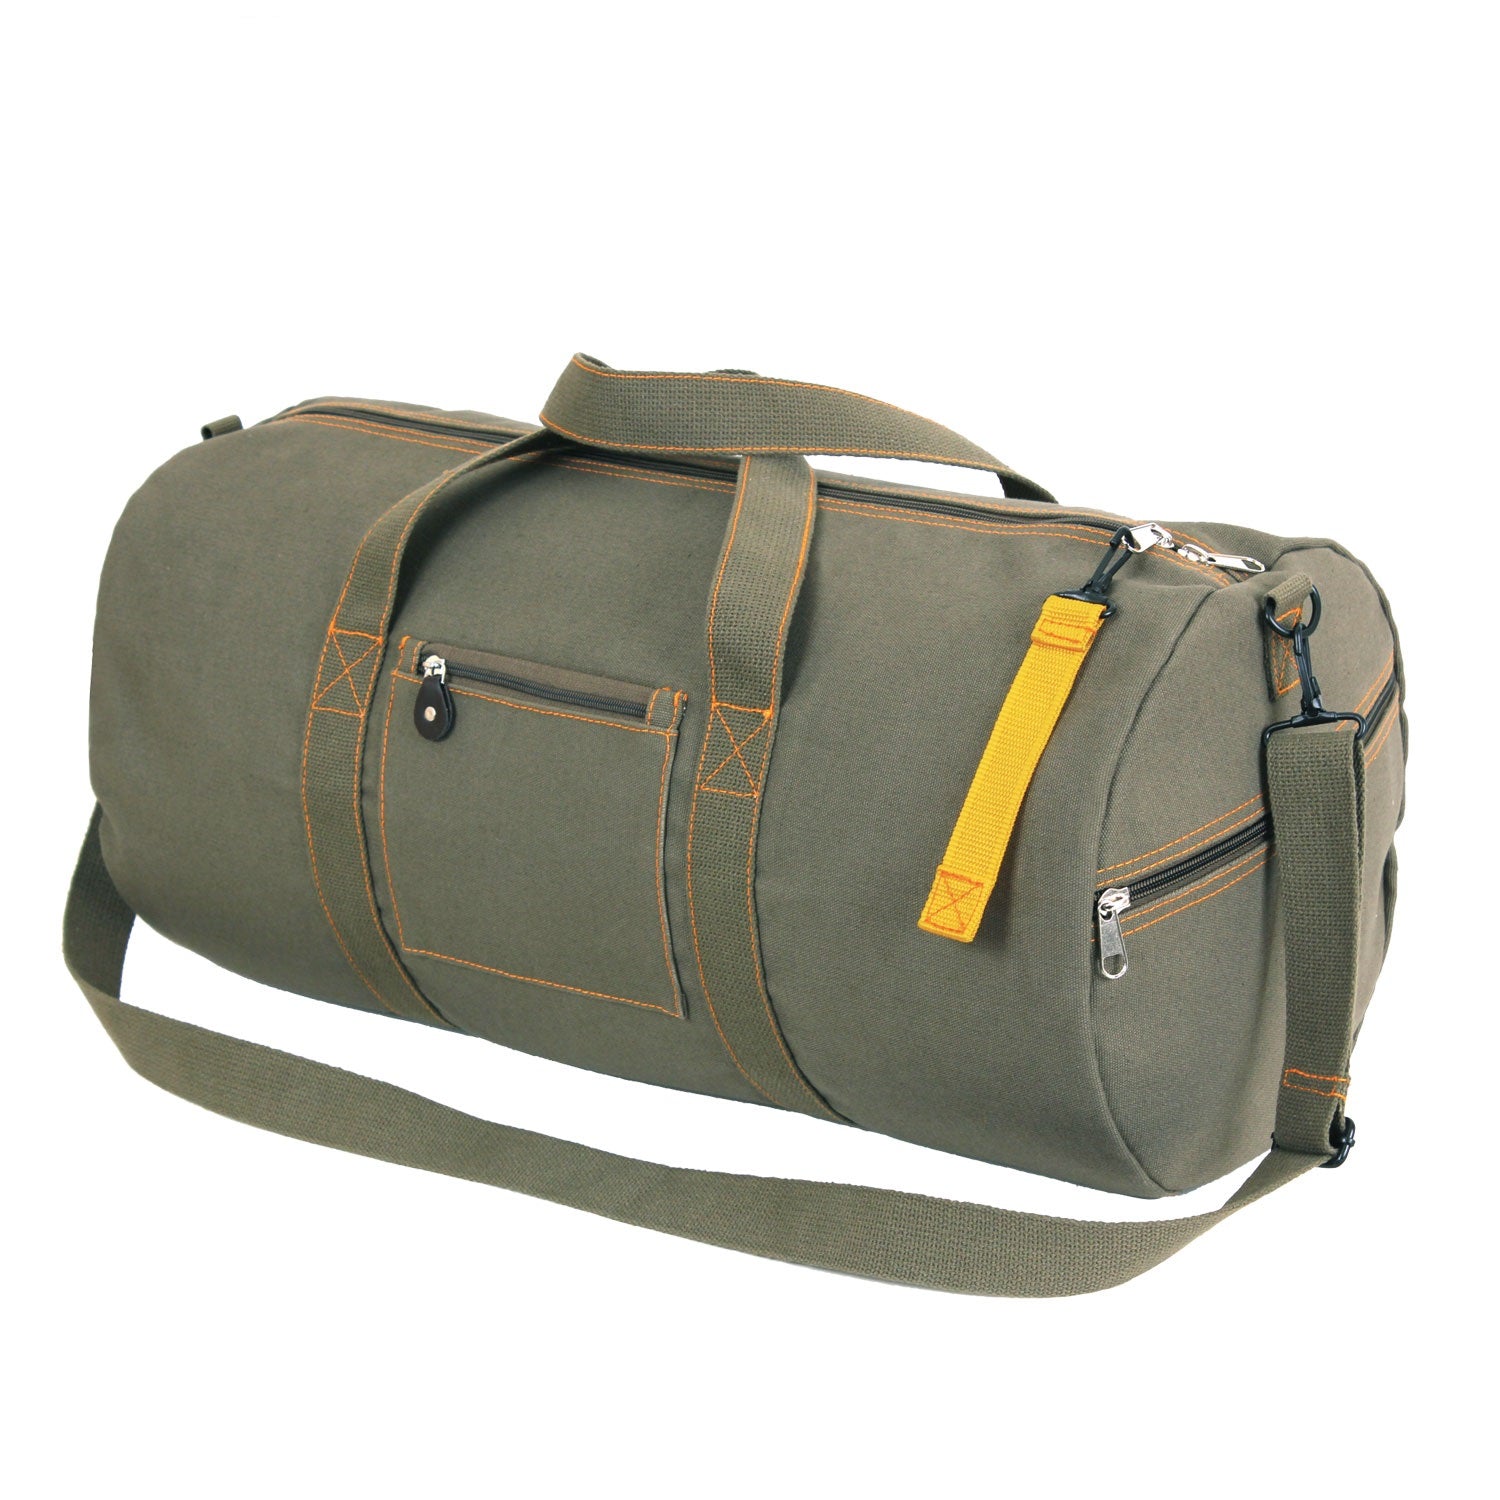 Rothco Canvas Equipment Bag - 24 Inches Olive Drab